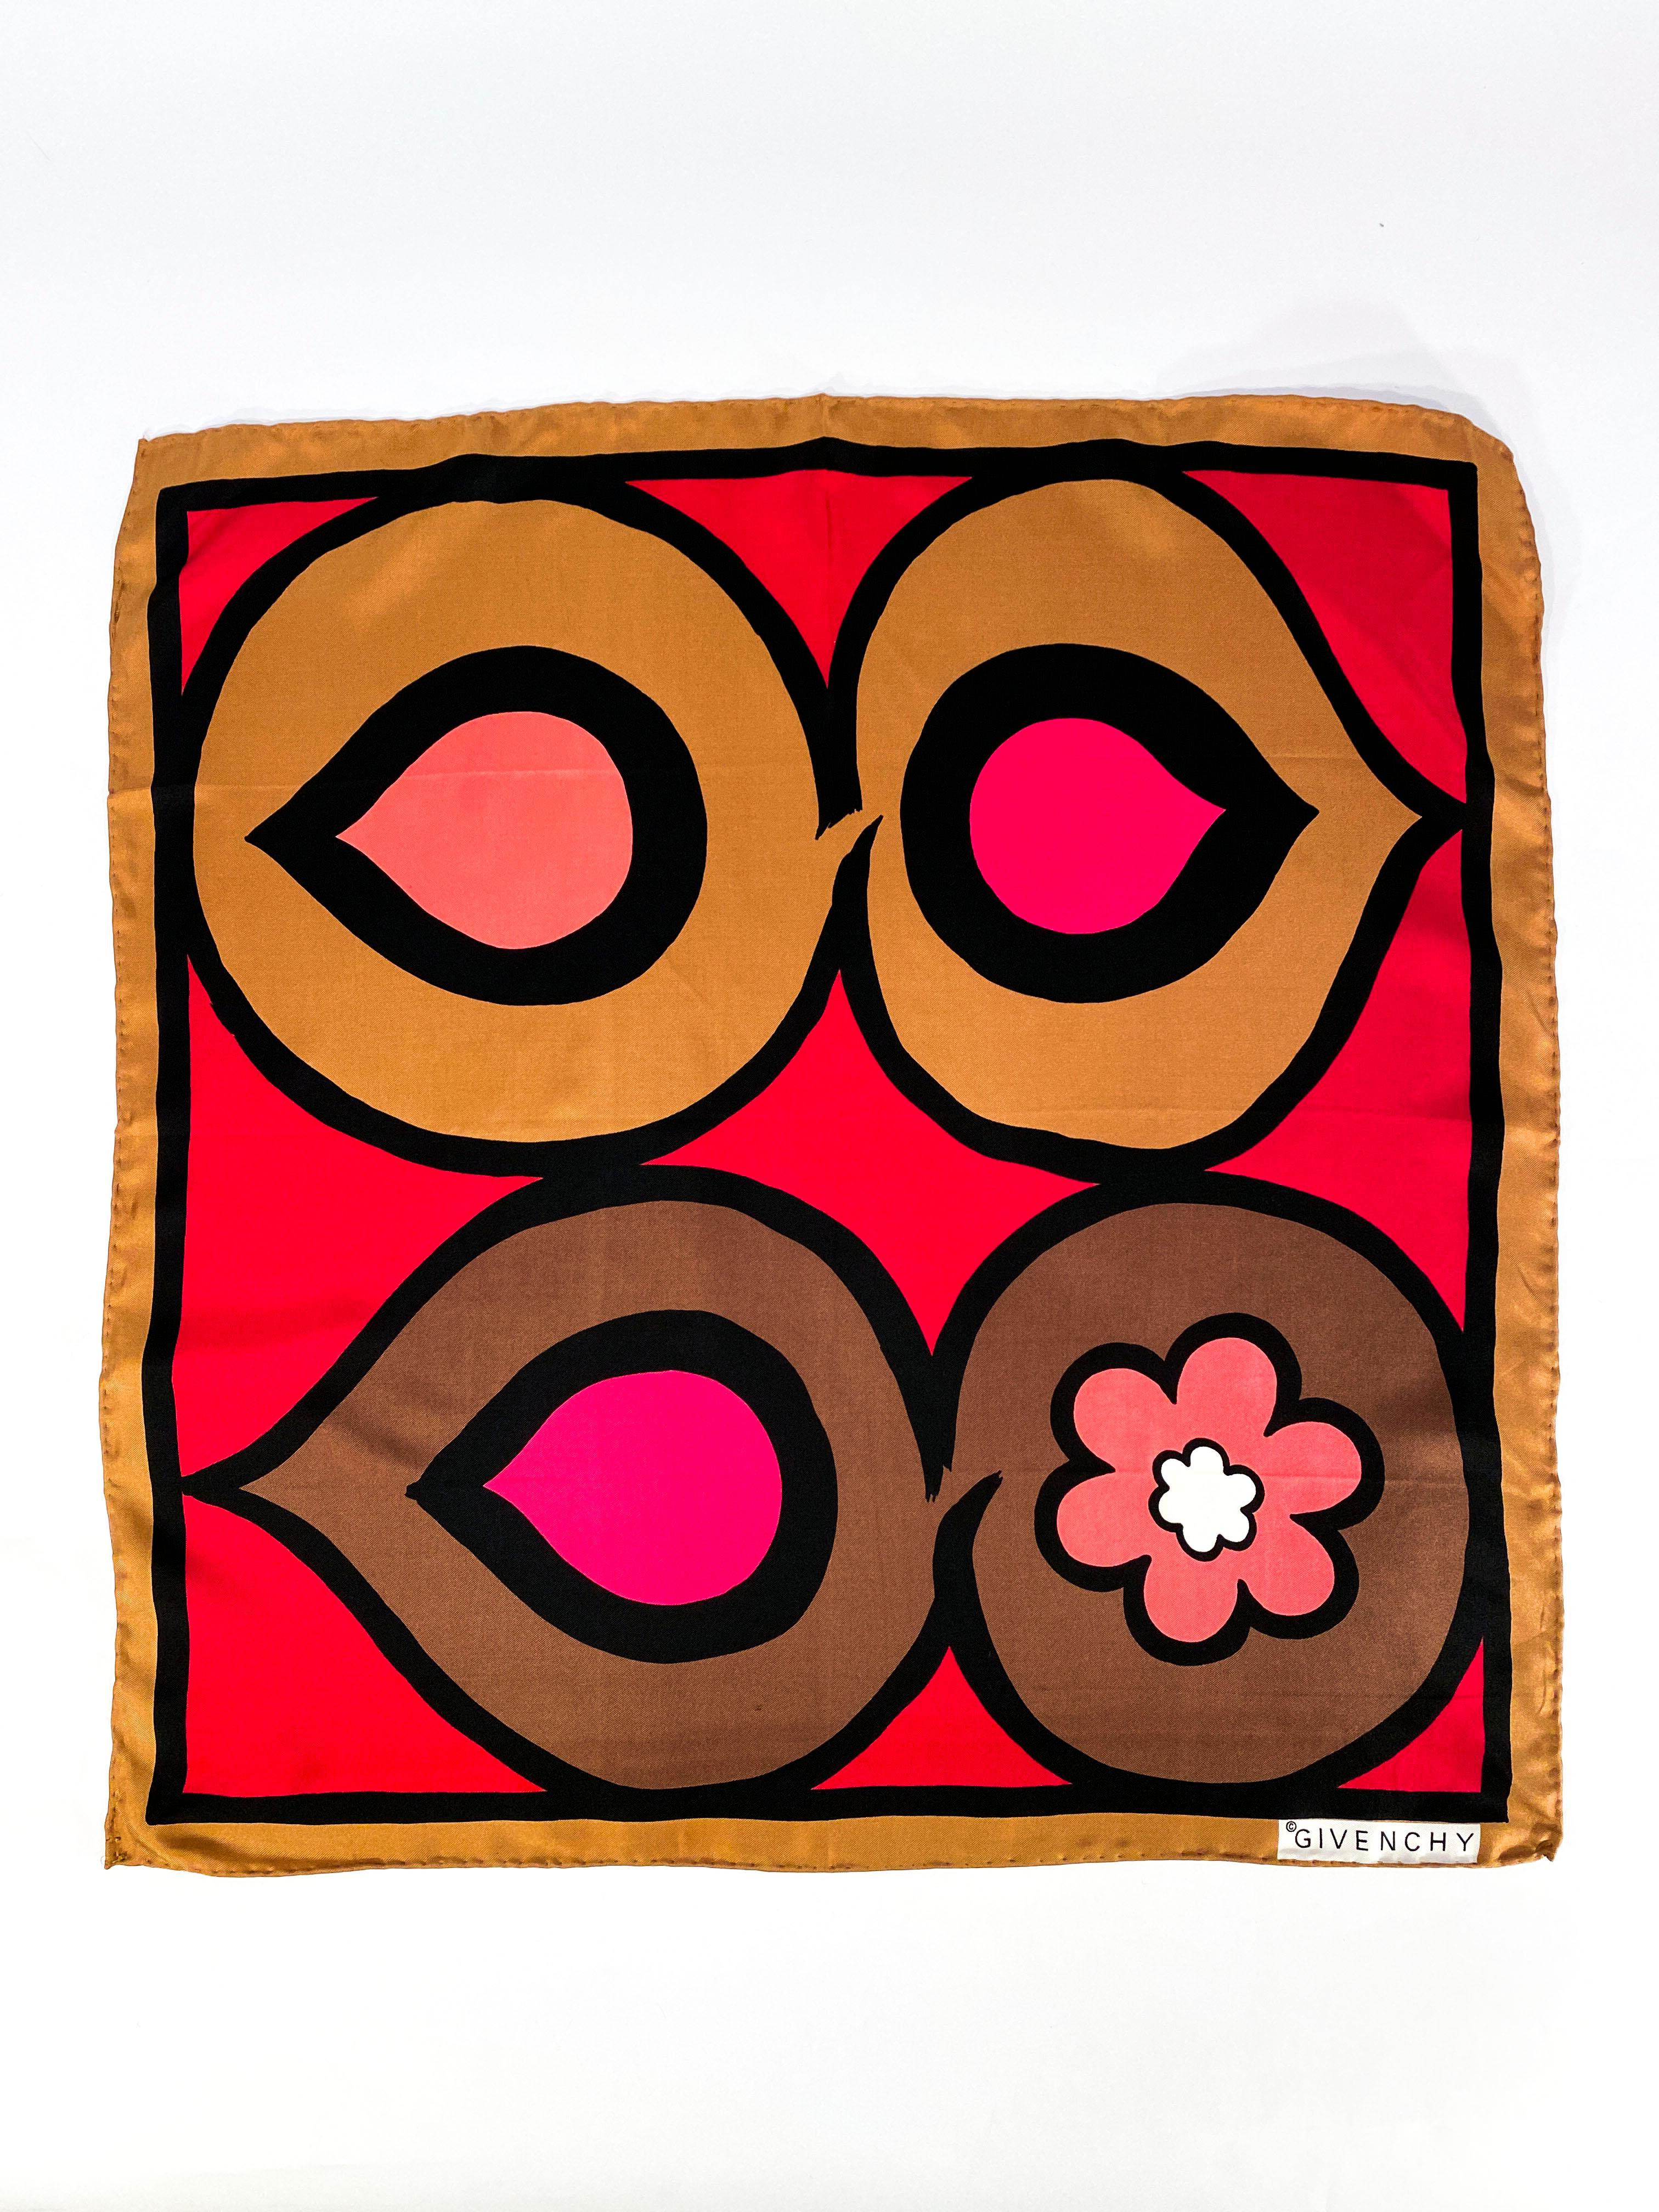 1960s Givenchy silk scarf featuring a color blocking mod print in mustard, brown, facia, and several shades of pink. The edges are hand-rolled and the illustration is outlined in a bold black stoke. 